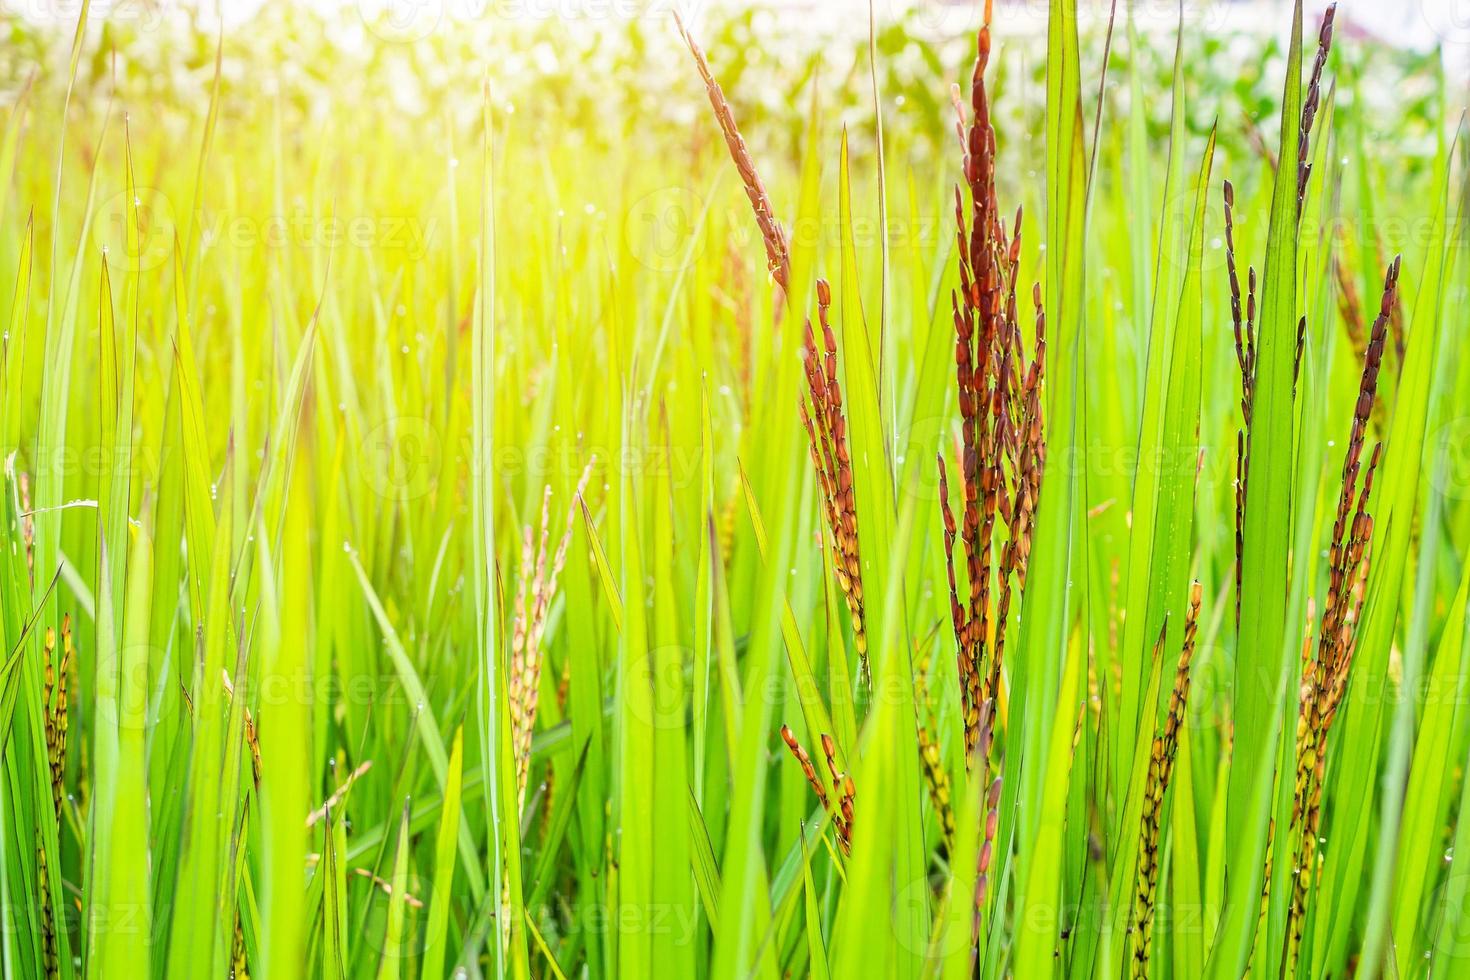 riceberry plant in green organic rice paddy field photo